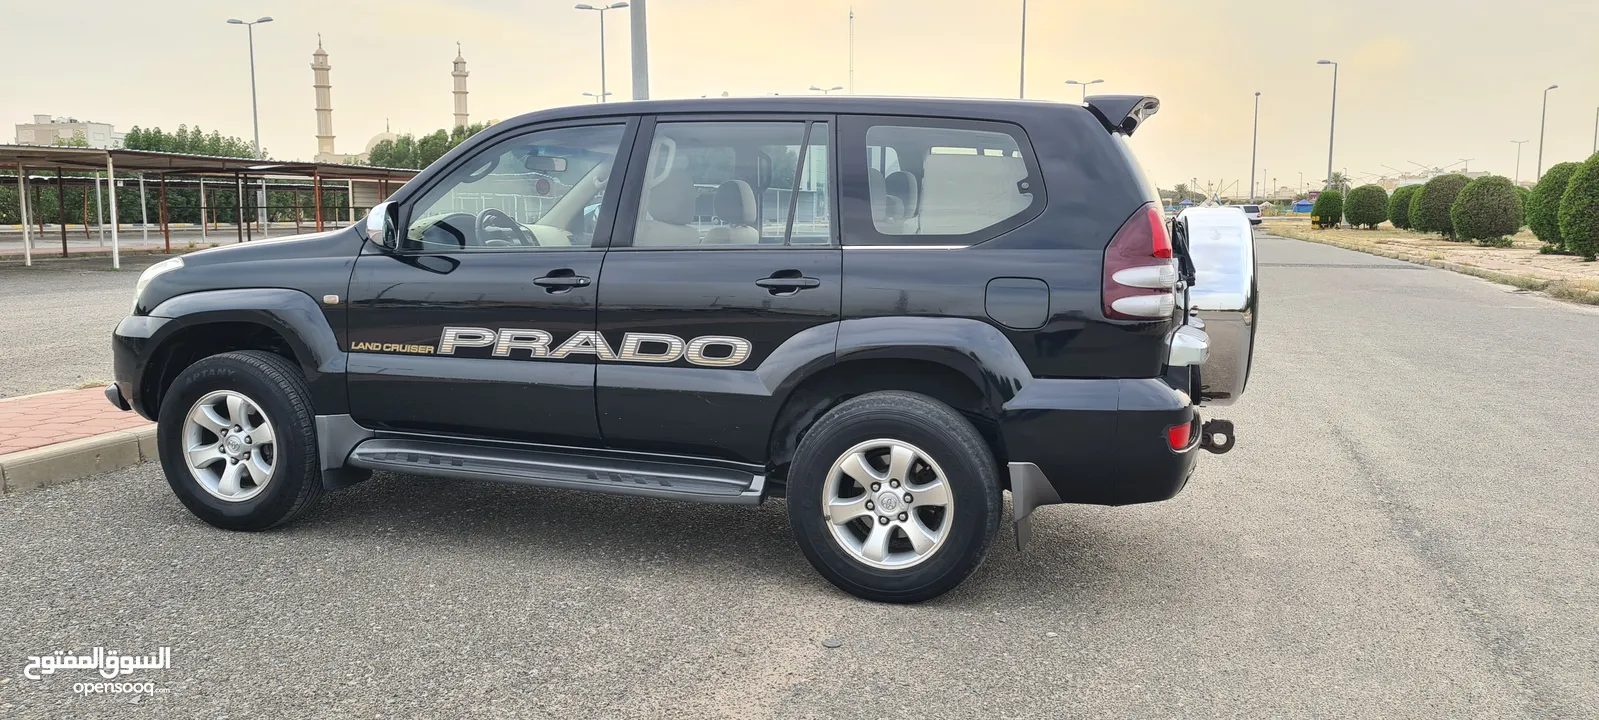 Urgent Sell Because of Leaving Kuwait... Good Condition Prado 2003 Black Color